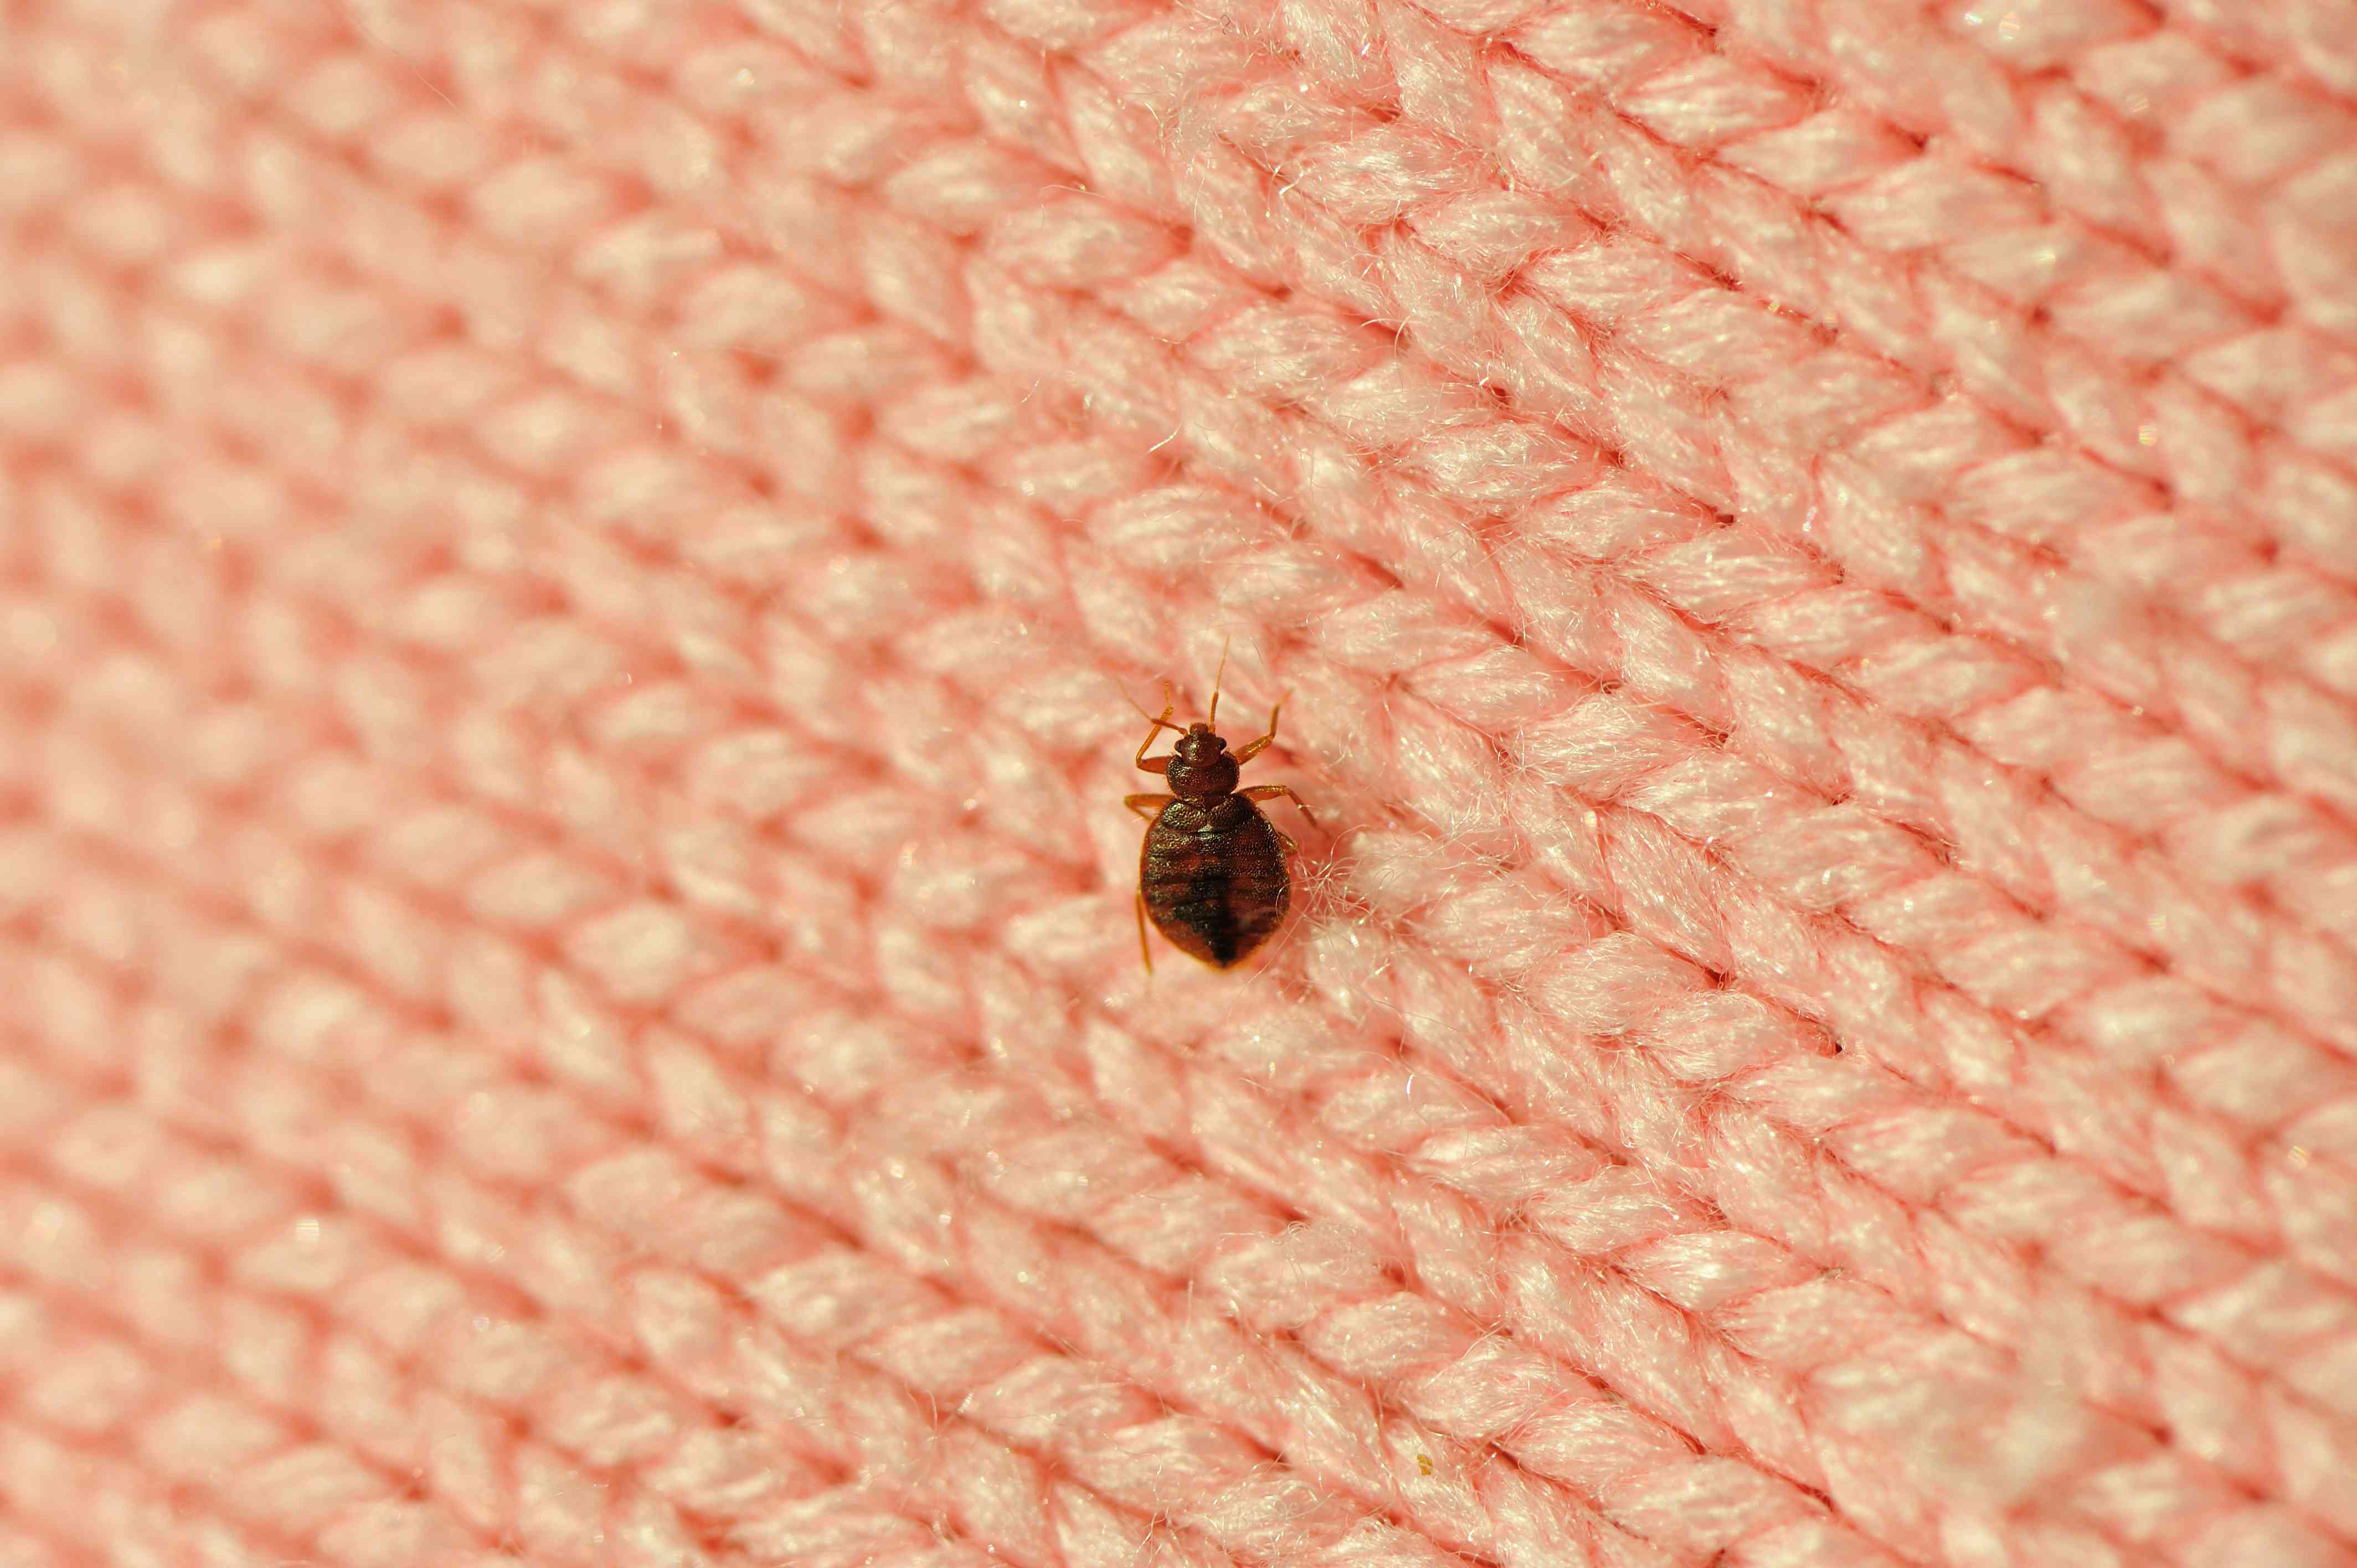 How To Get Rid Of Bedbugs? Find Out Some Amazing Tricks